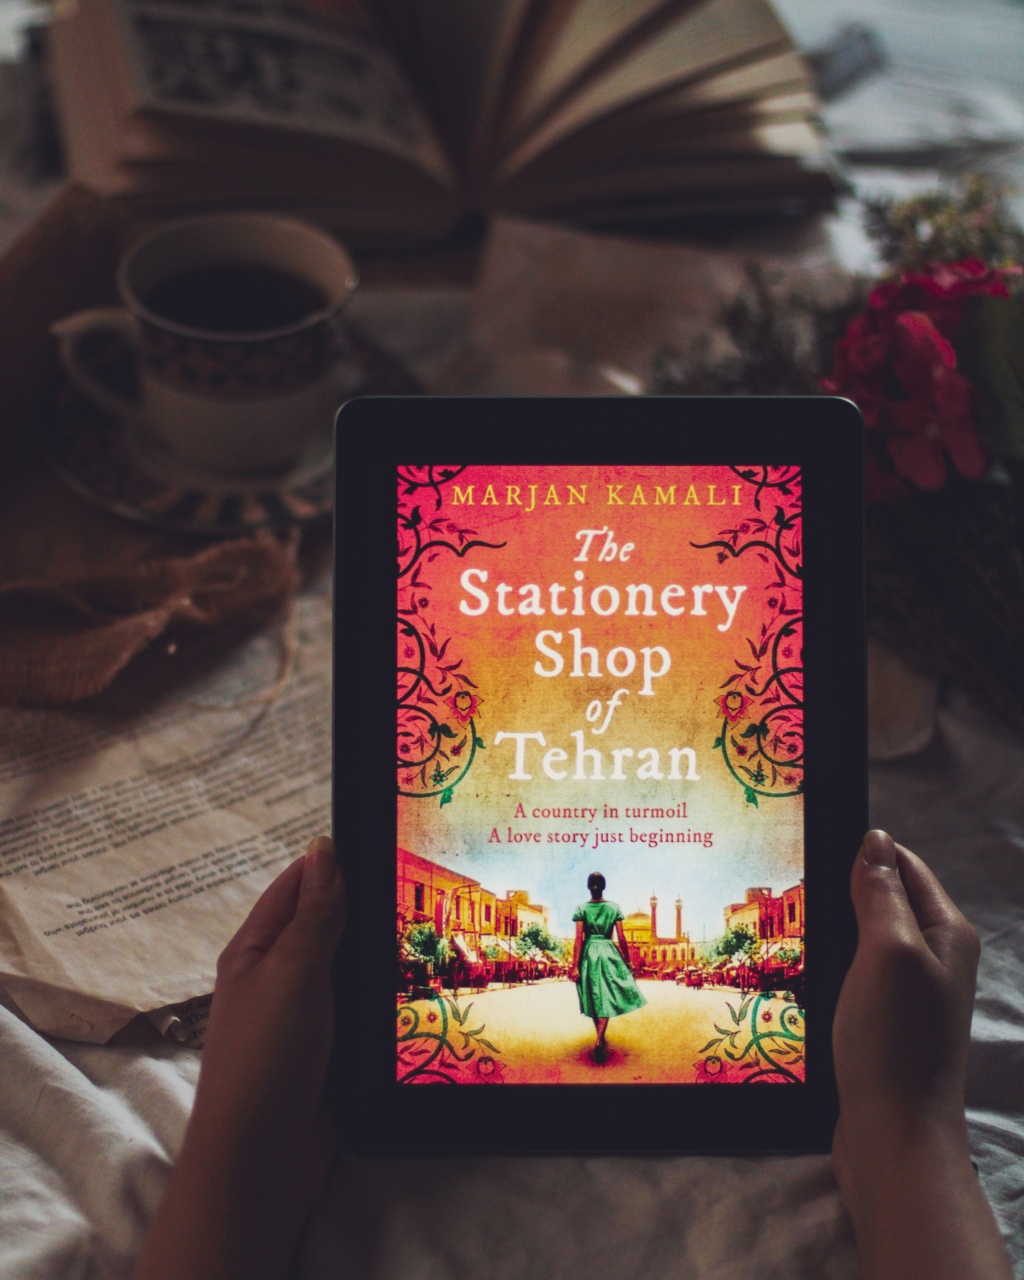 The  Stationery Shop of Tehran by Marjan Kamali: Of love, loss and fate